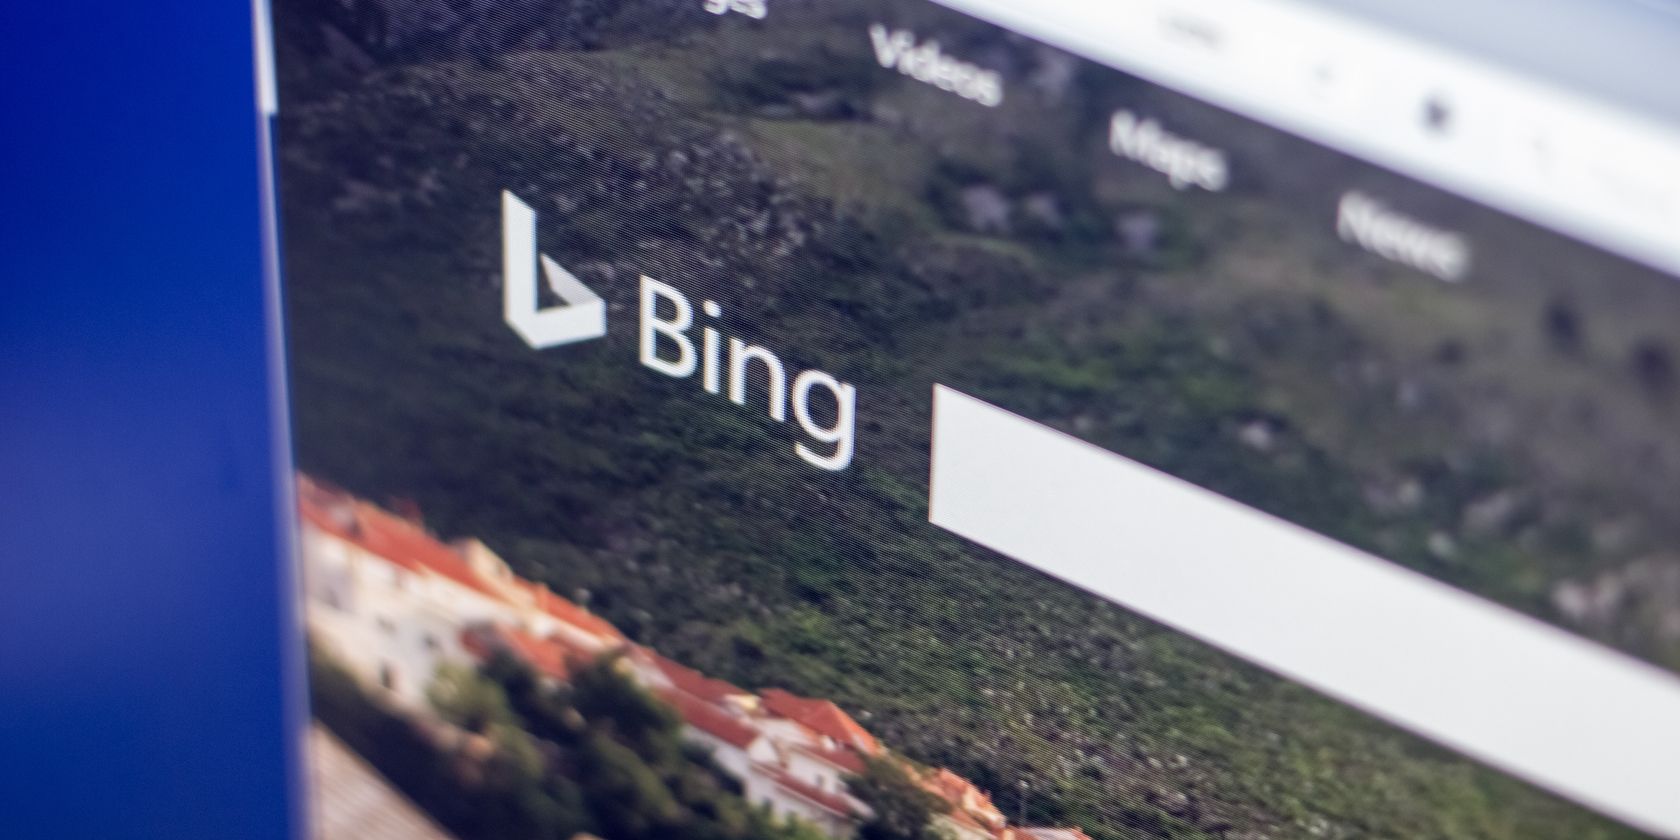 The Bing search engine